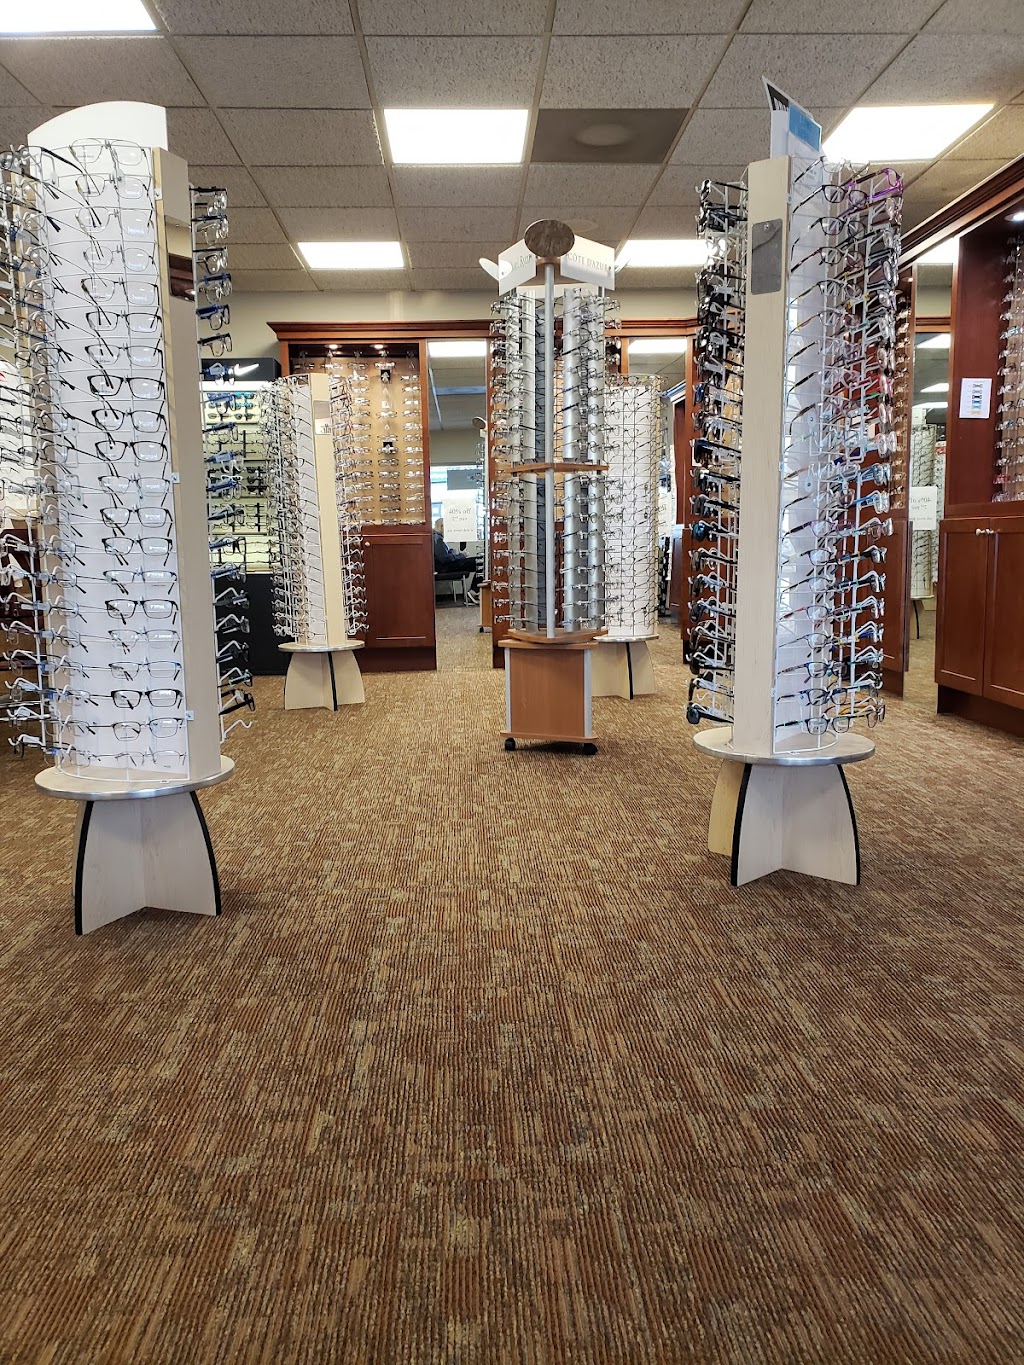 Consumer Optical | 1426 Altamont Ave Suite 1, Schenectady, NY 12303 | Phone: (518) 355-0795